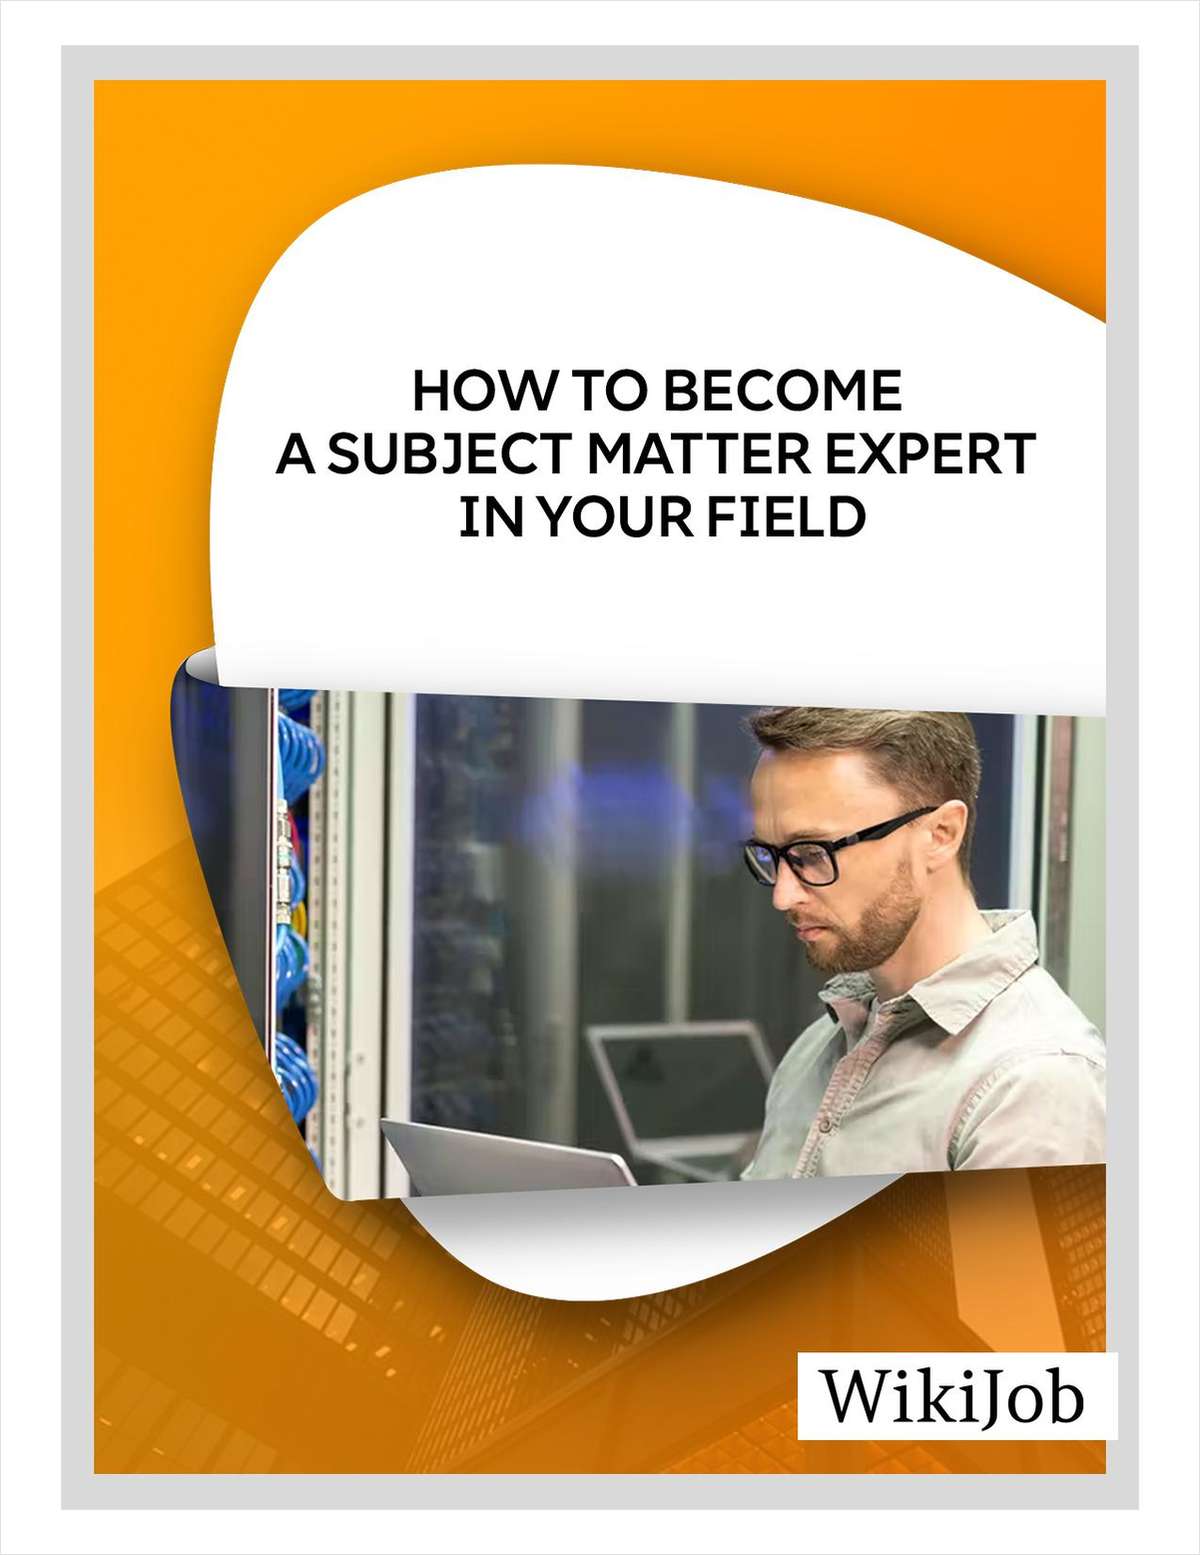 How to Become a Subject Matter Expert in Your Field